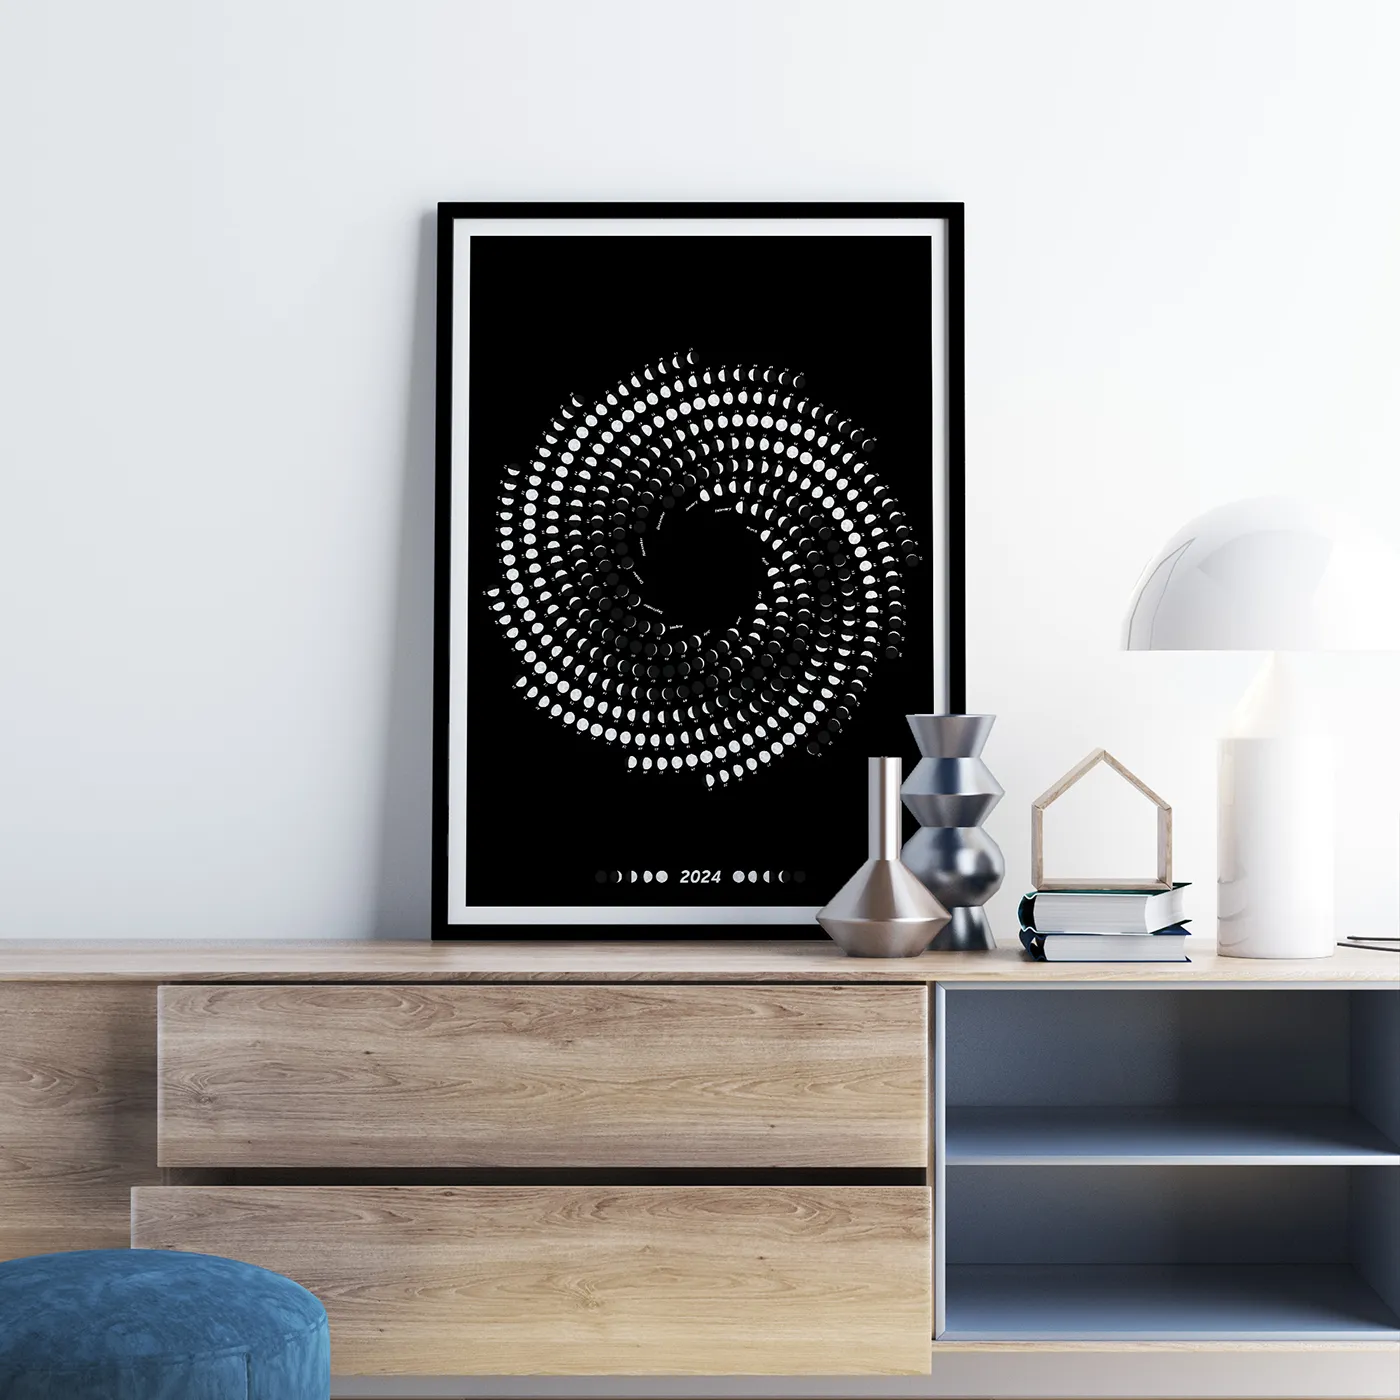 2024 Moon Calendar Poster with Phases of Moon, Single Page Space Art